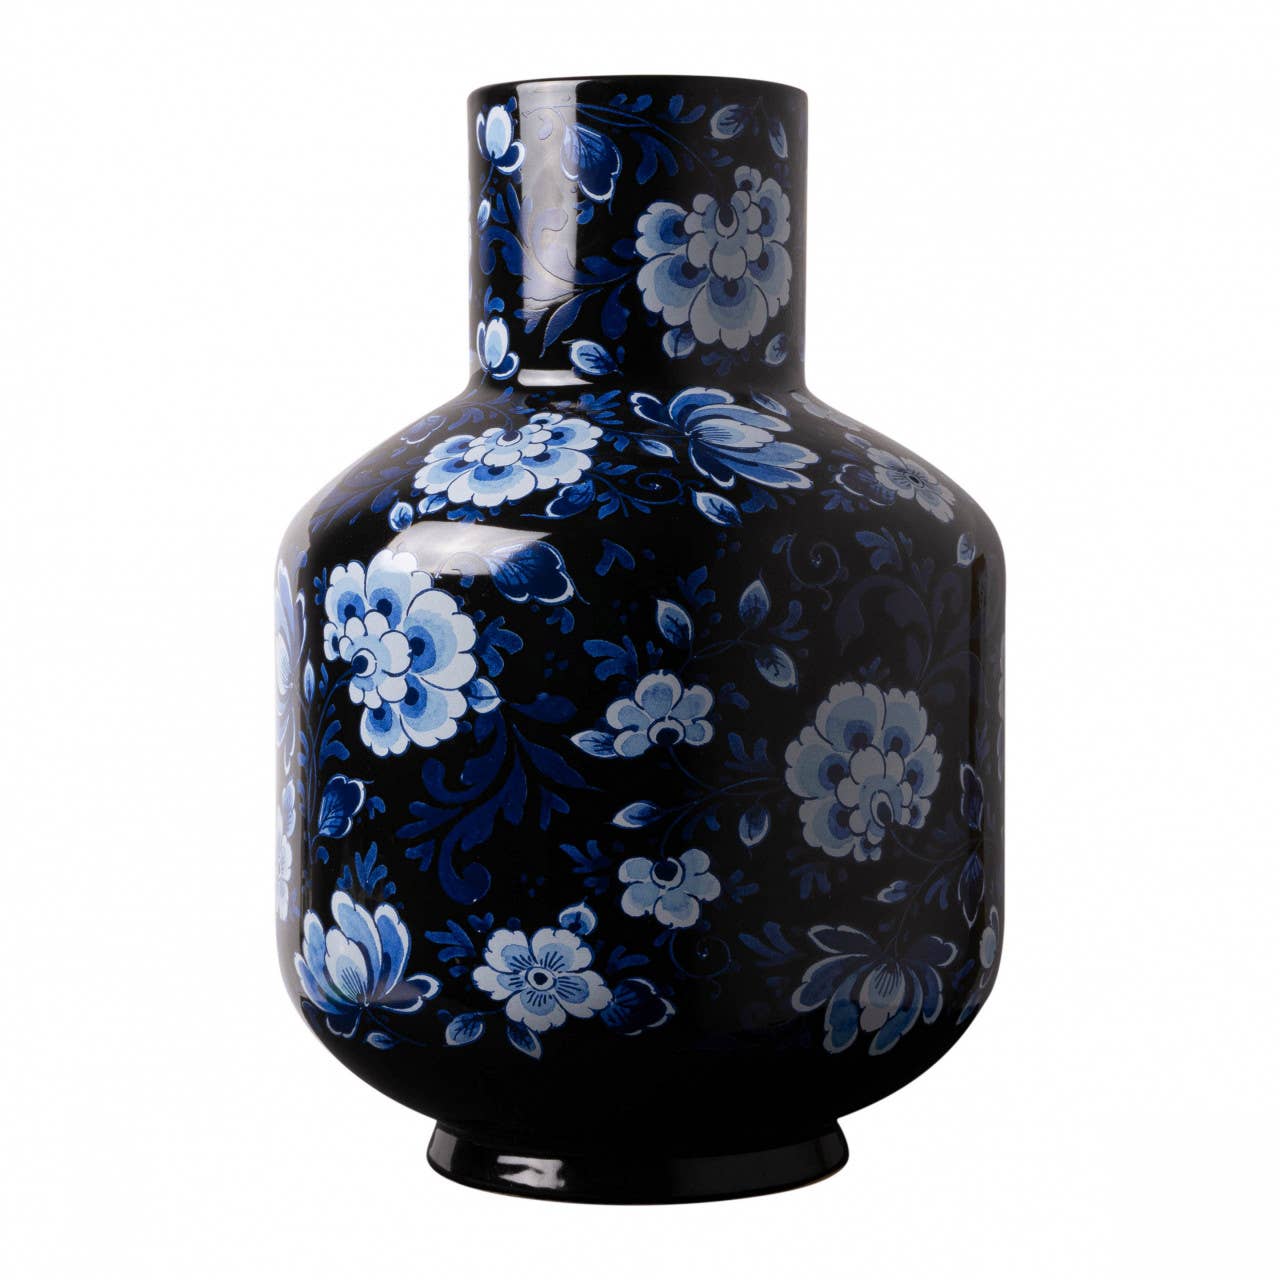 High Ball Vase in Black and Blue Floral